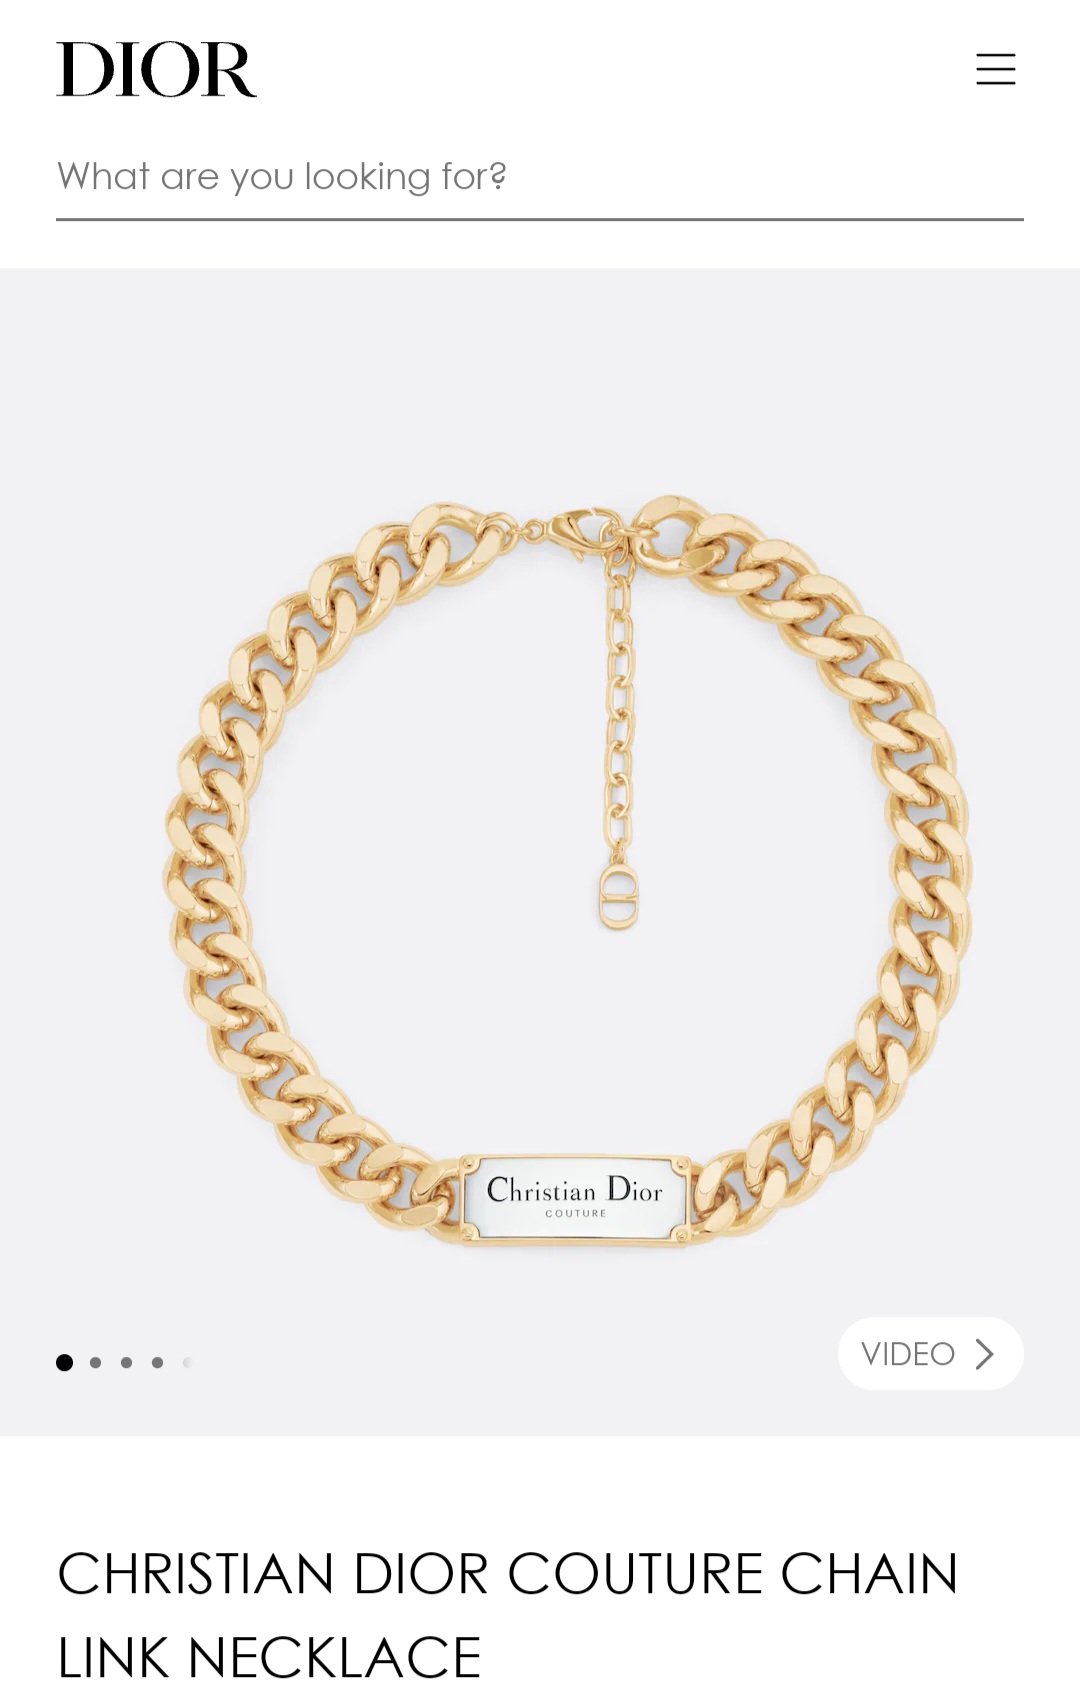 CHRISTIAN DIOR COUTURE CHAIN LINK necklace